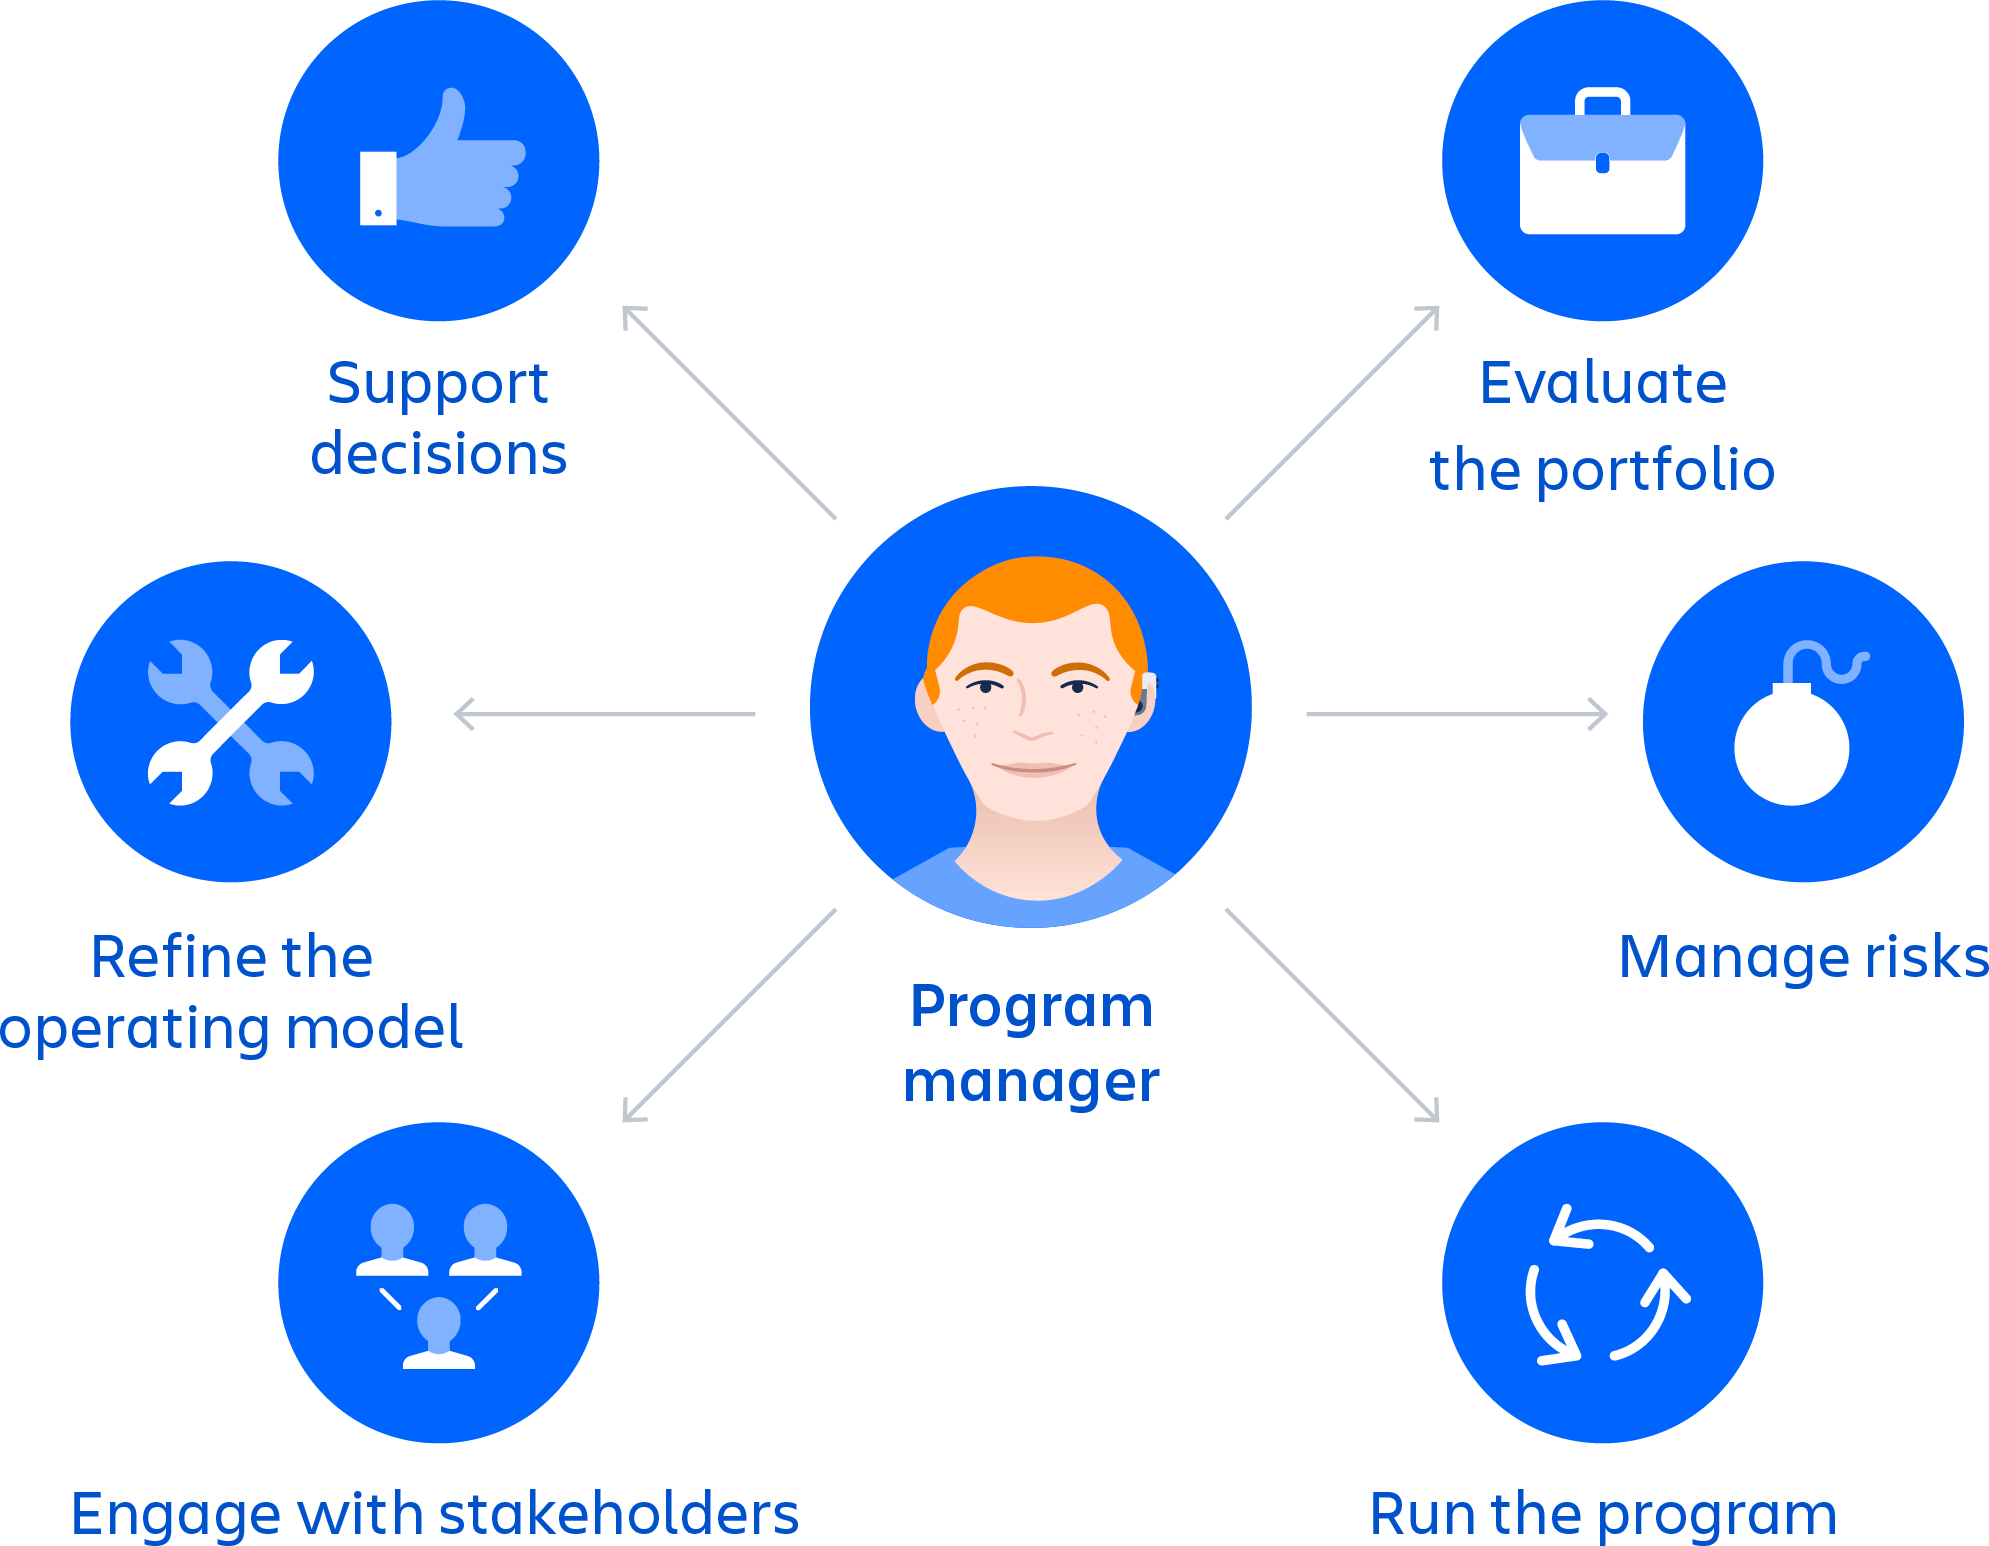 Program Manager meeple in the middle with arrows pointing out to six bubbles with icons that have text below each one: Evaluate the portfolio, Manage risks, Run the program, Engage with stakeholders, Refine the operating model, Support decisions